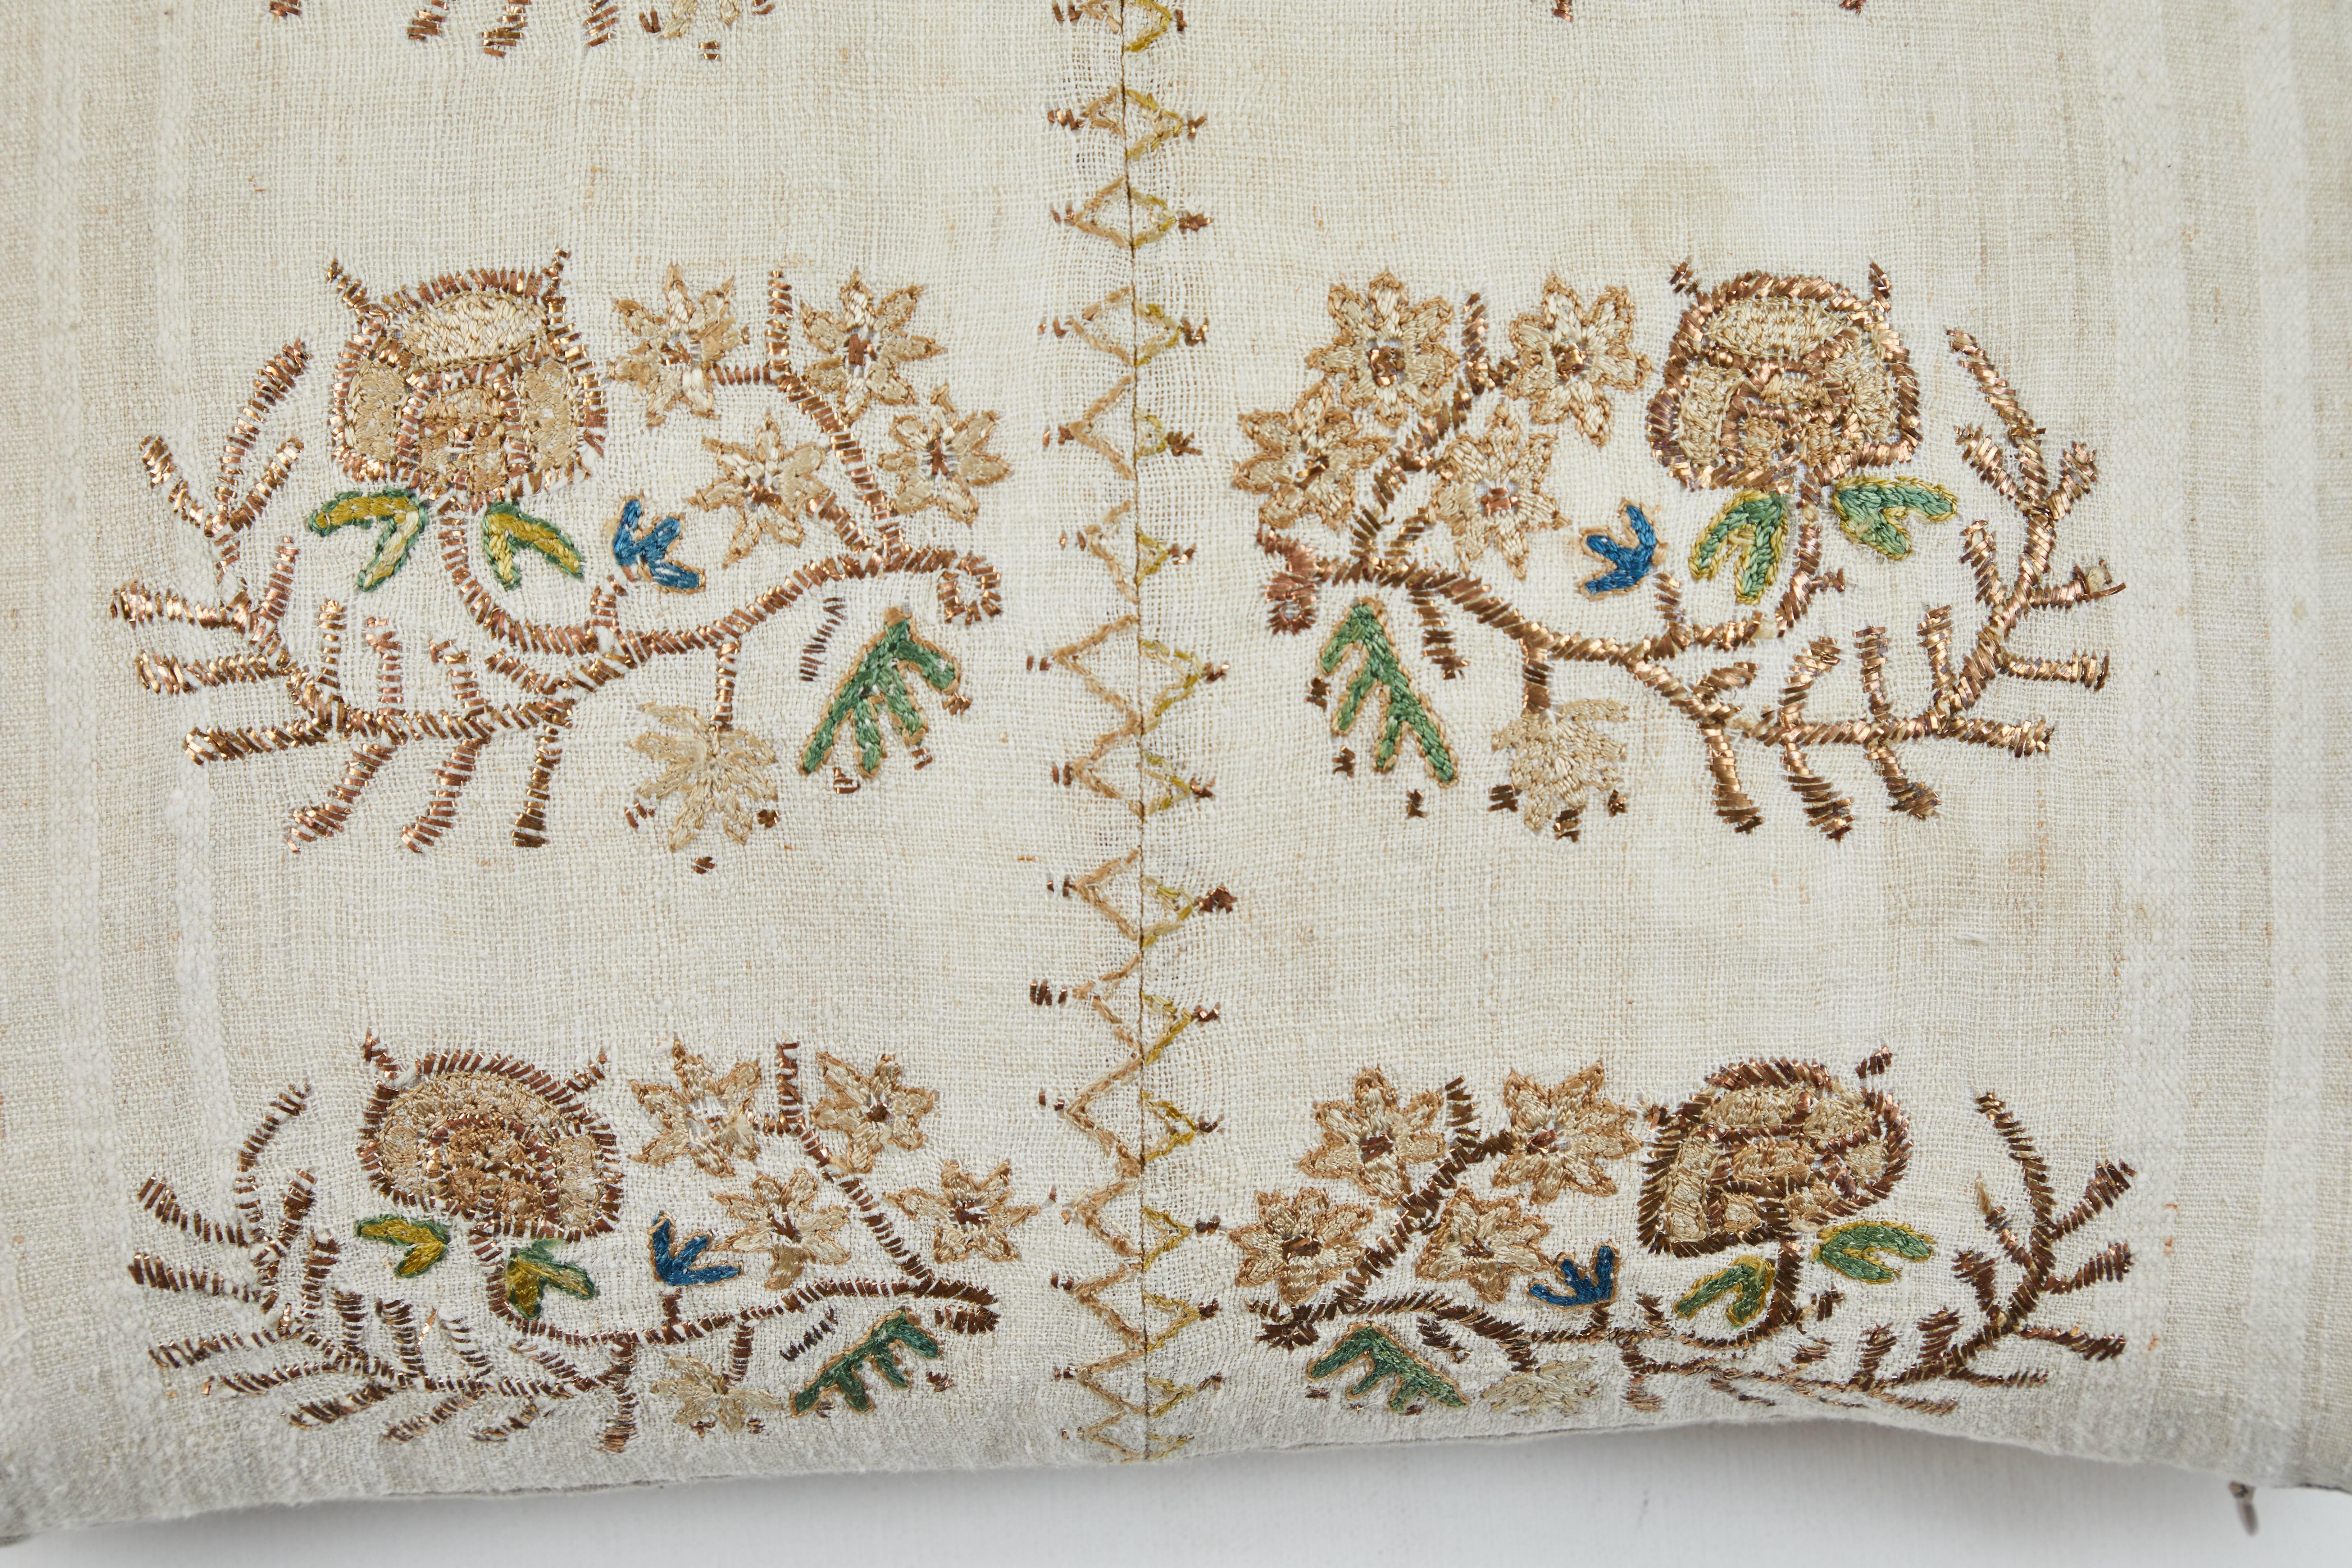 Other Antique Turkish Ottoman Embroidery Pillow For Sale